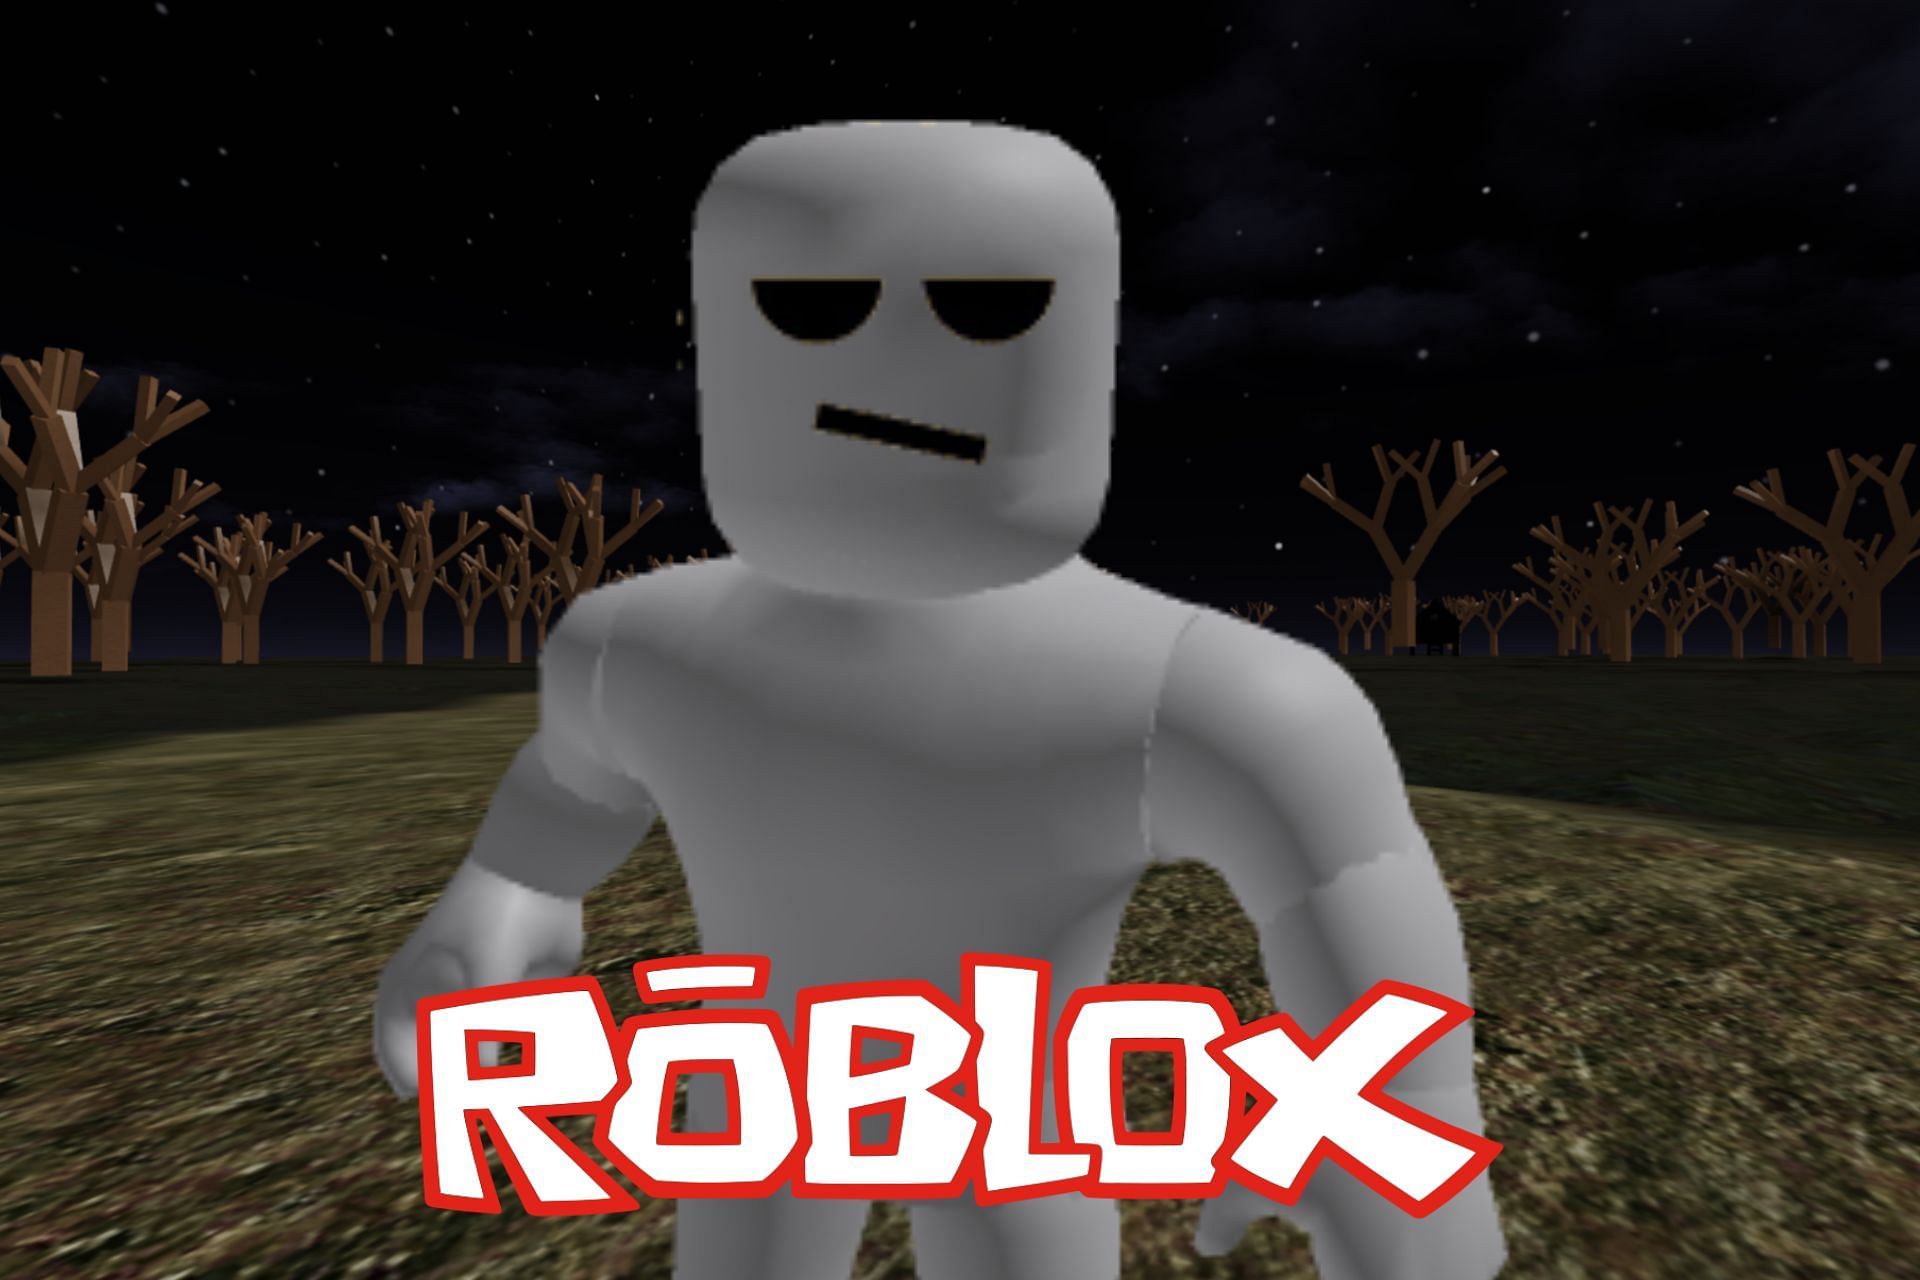 Does being the #1 most hated Roblox player count as clout? I think so!